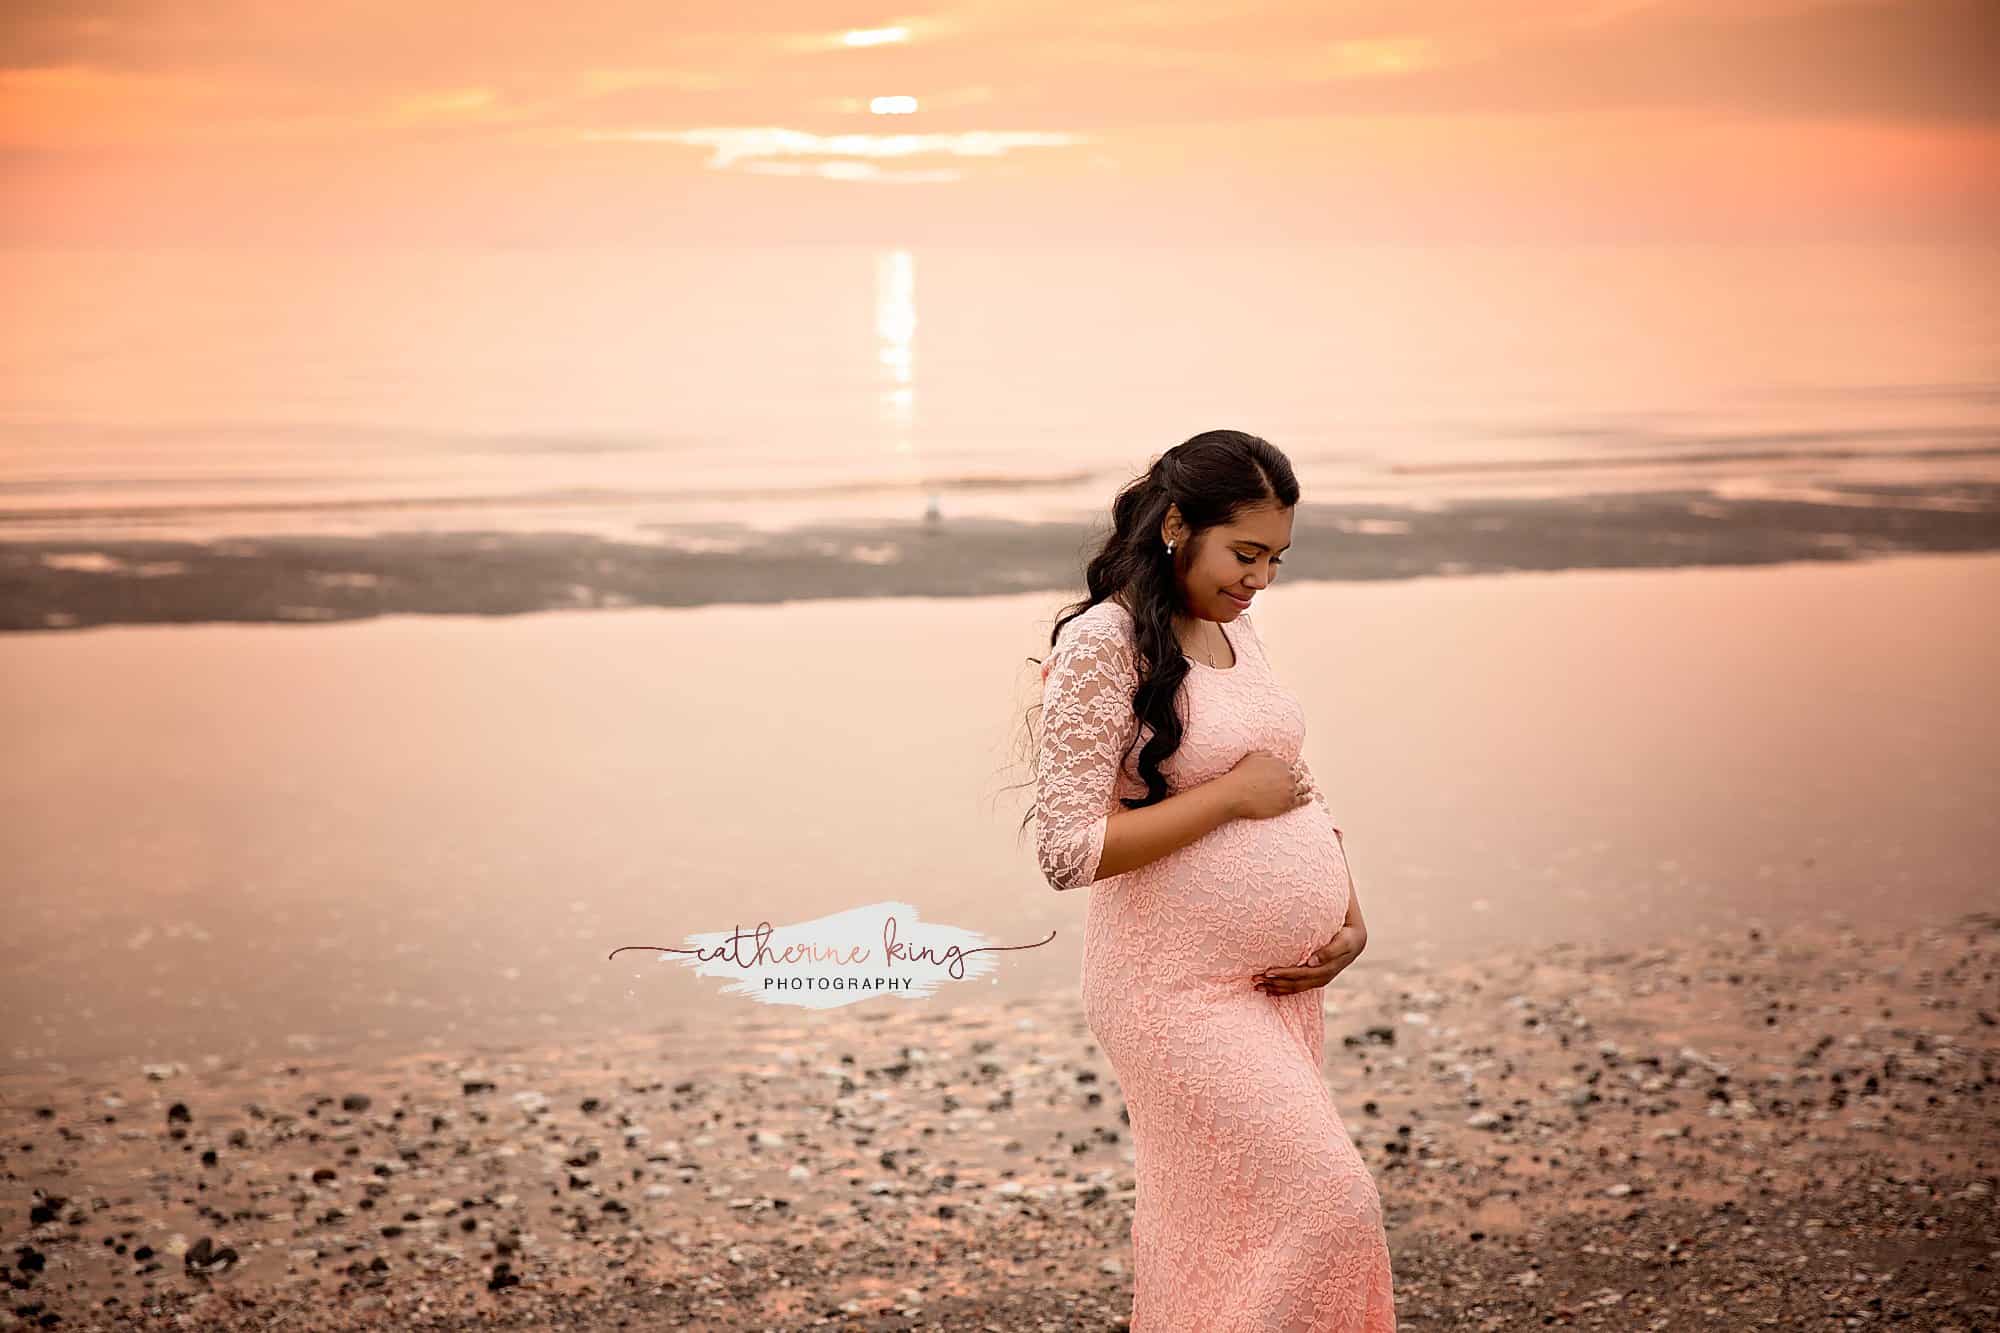 Winter Maternity Photography at the beach in Madison CT